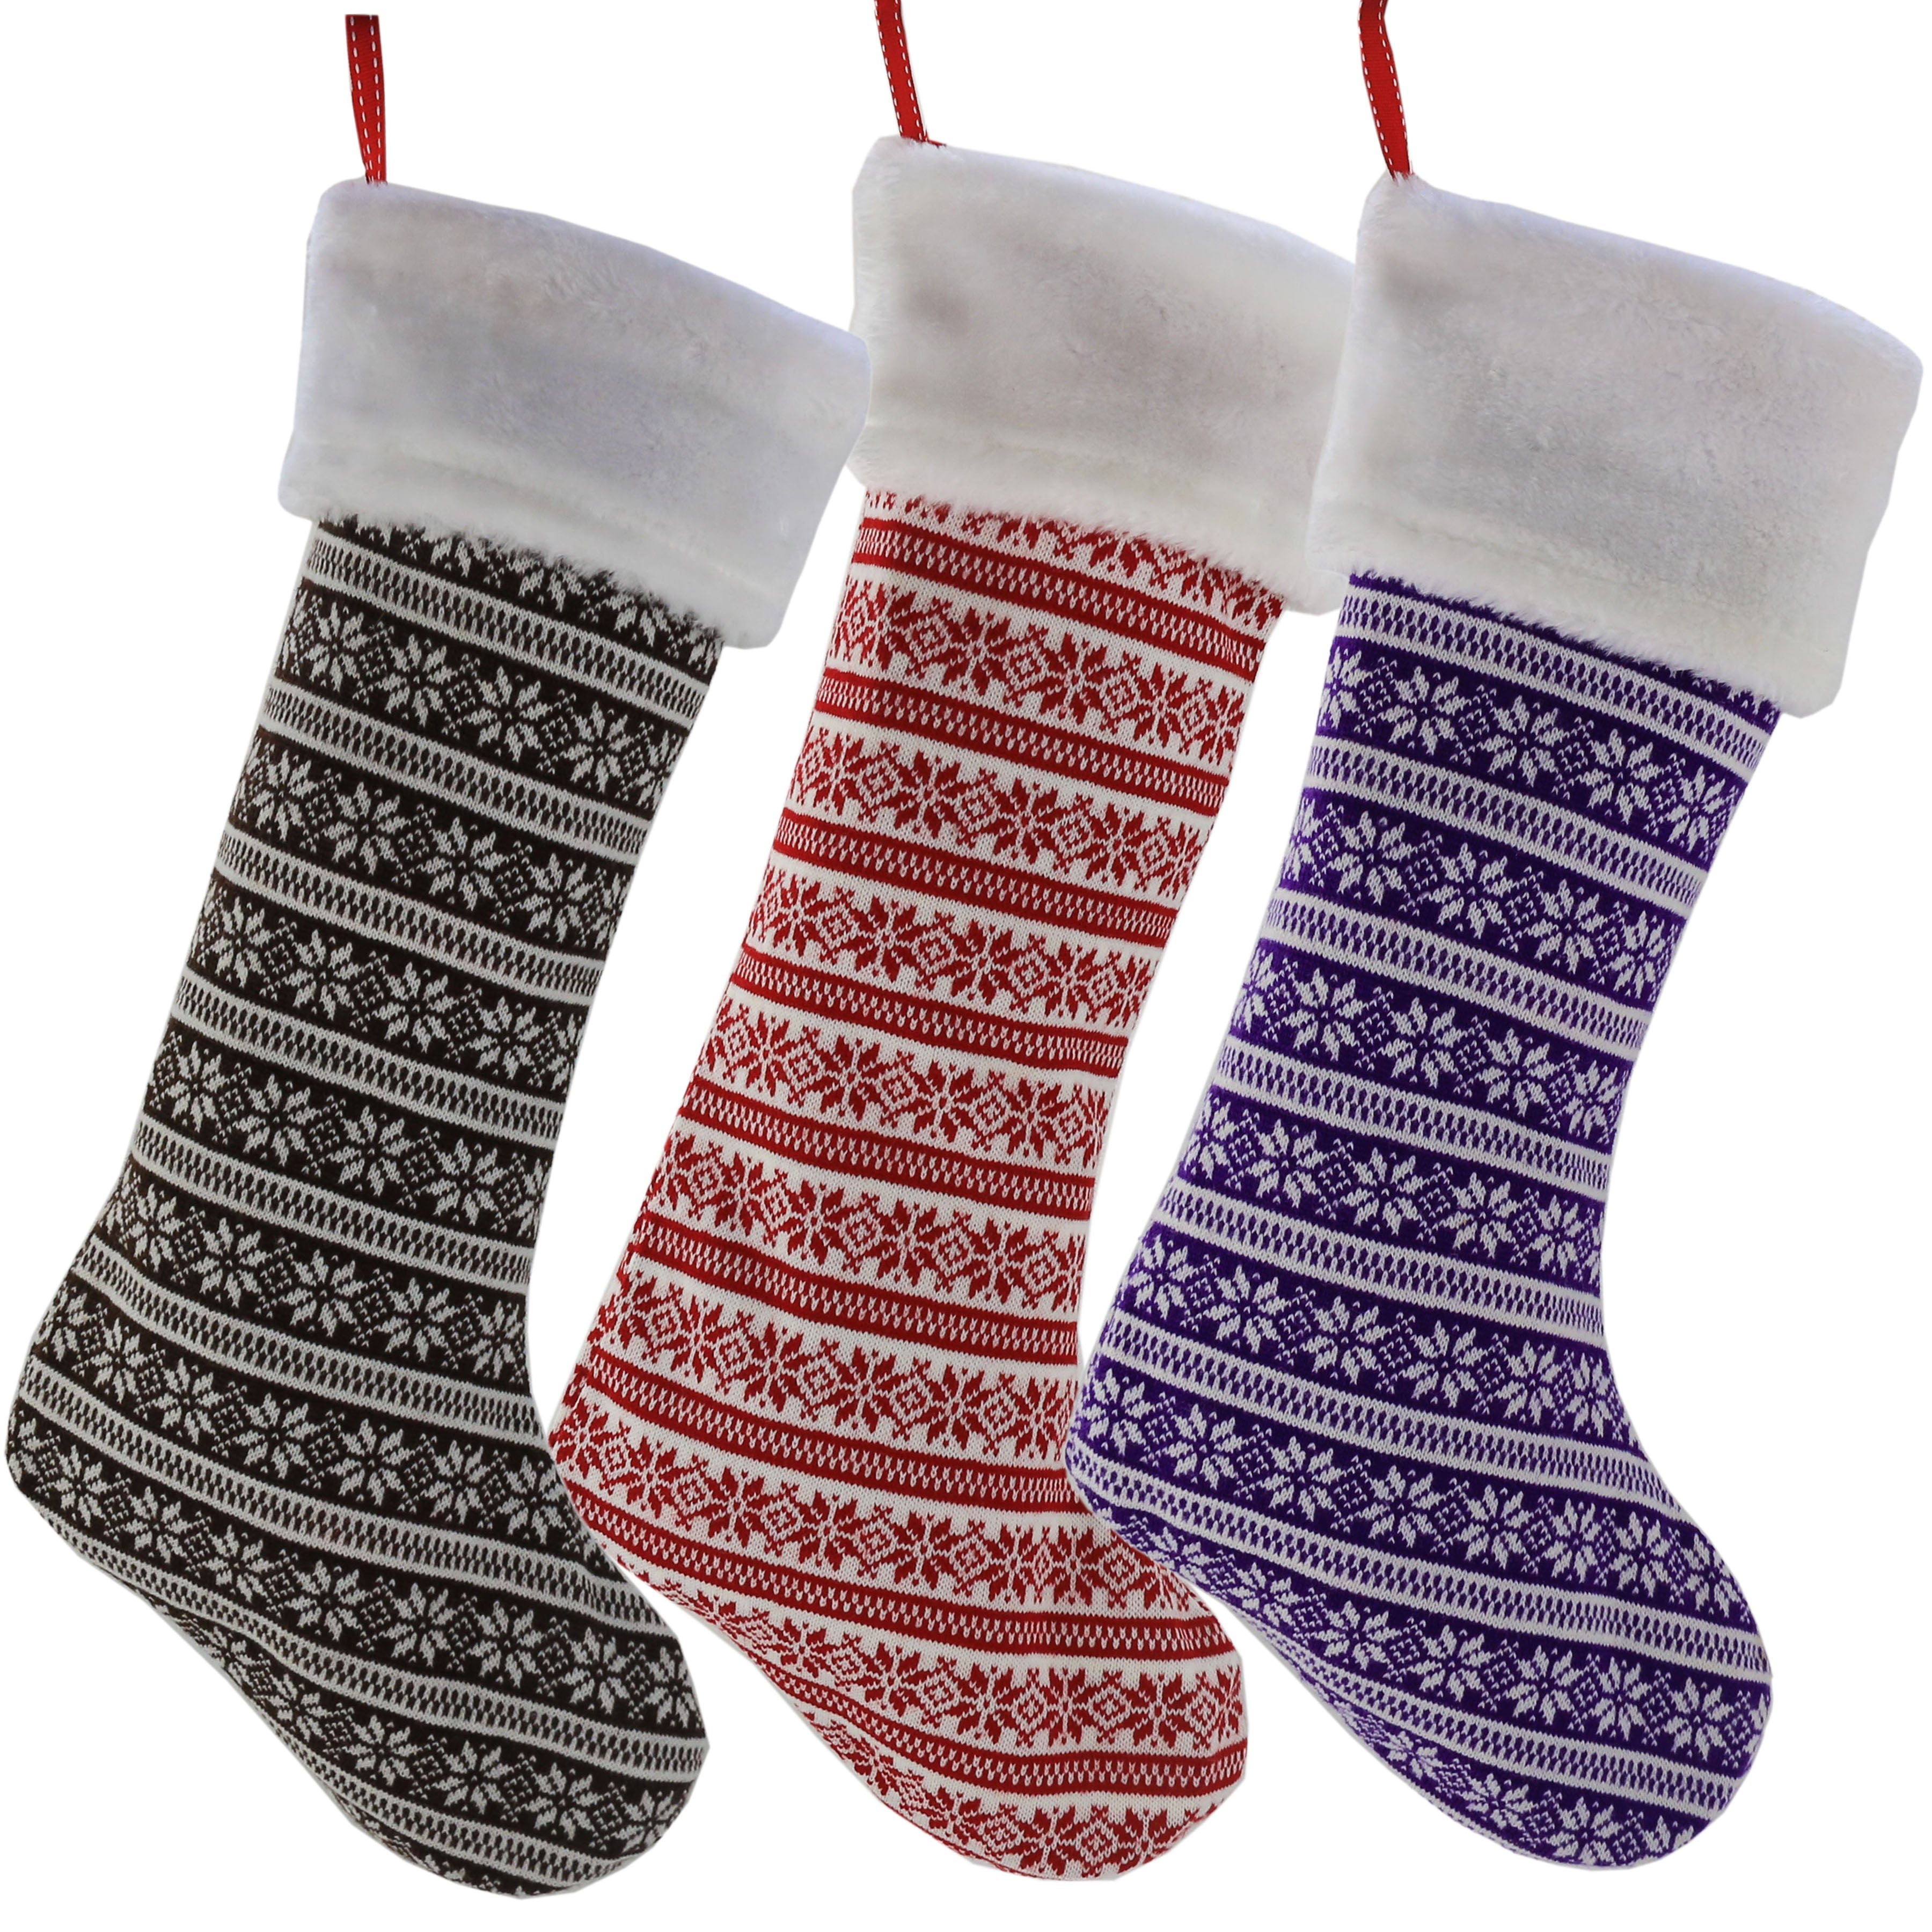 handmade striped knit Christmas stockings set of 3, 19 Inch | Bstaofy - Glow Guards